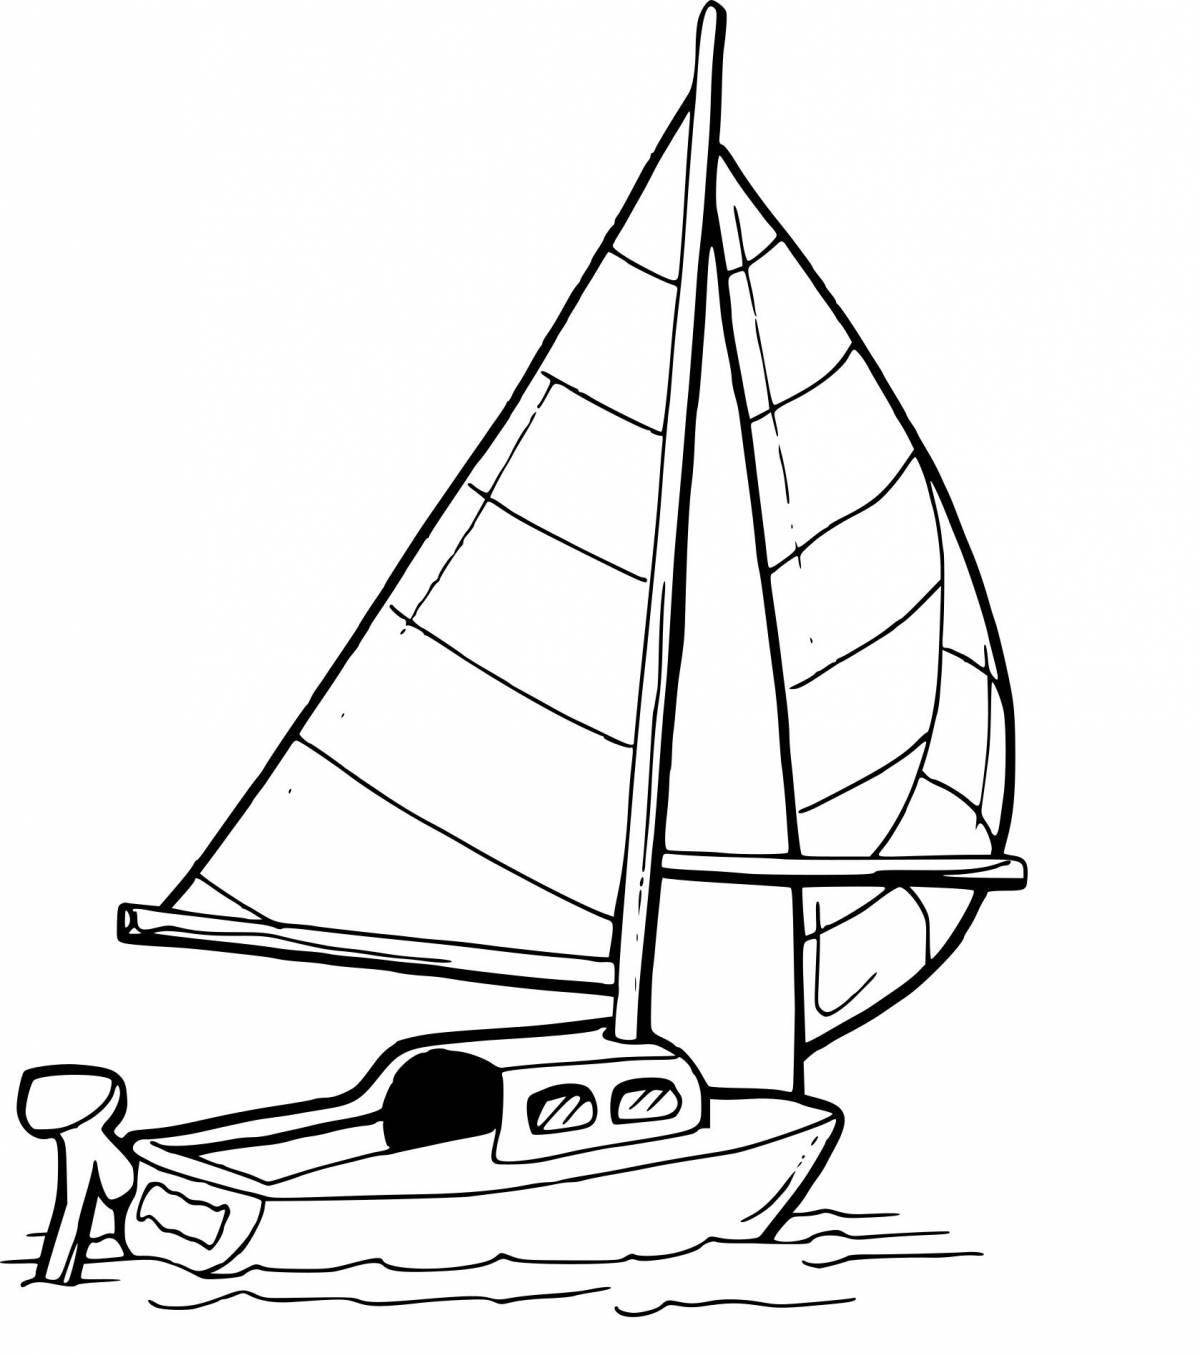 Palace yacht coloring page